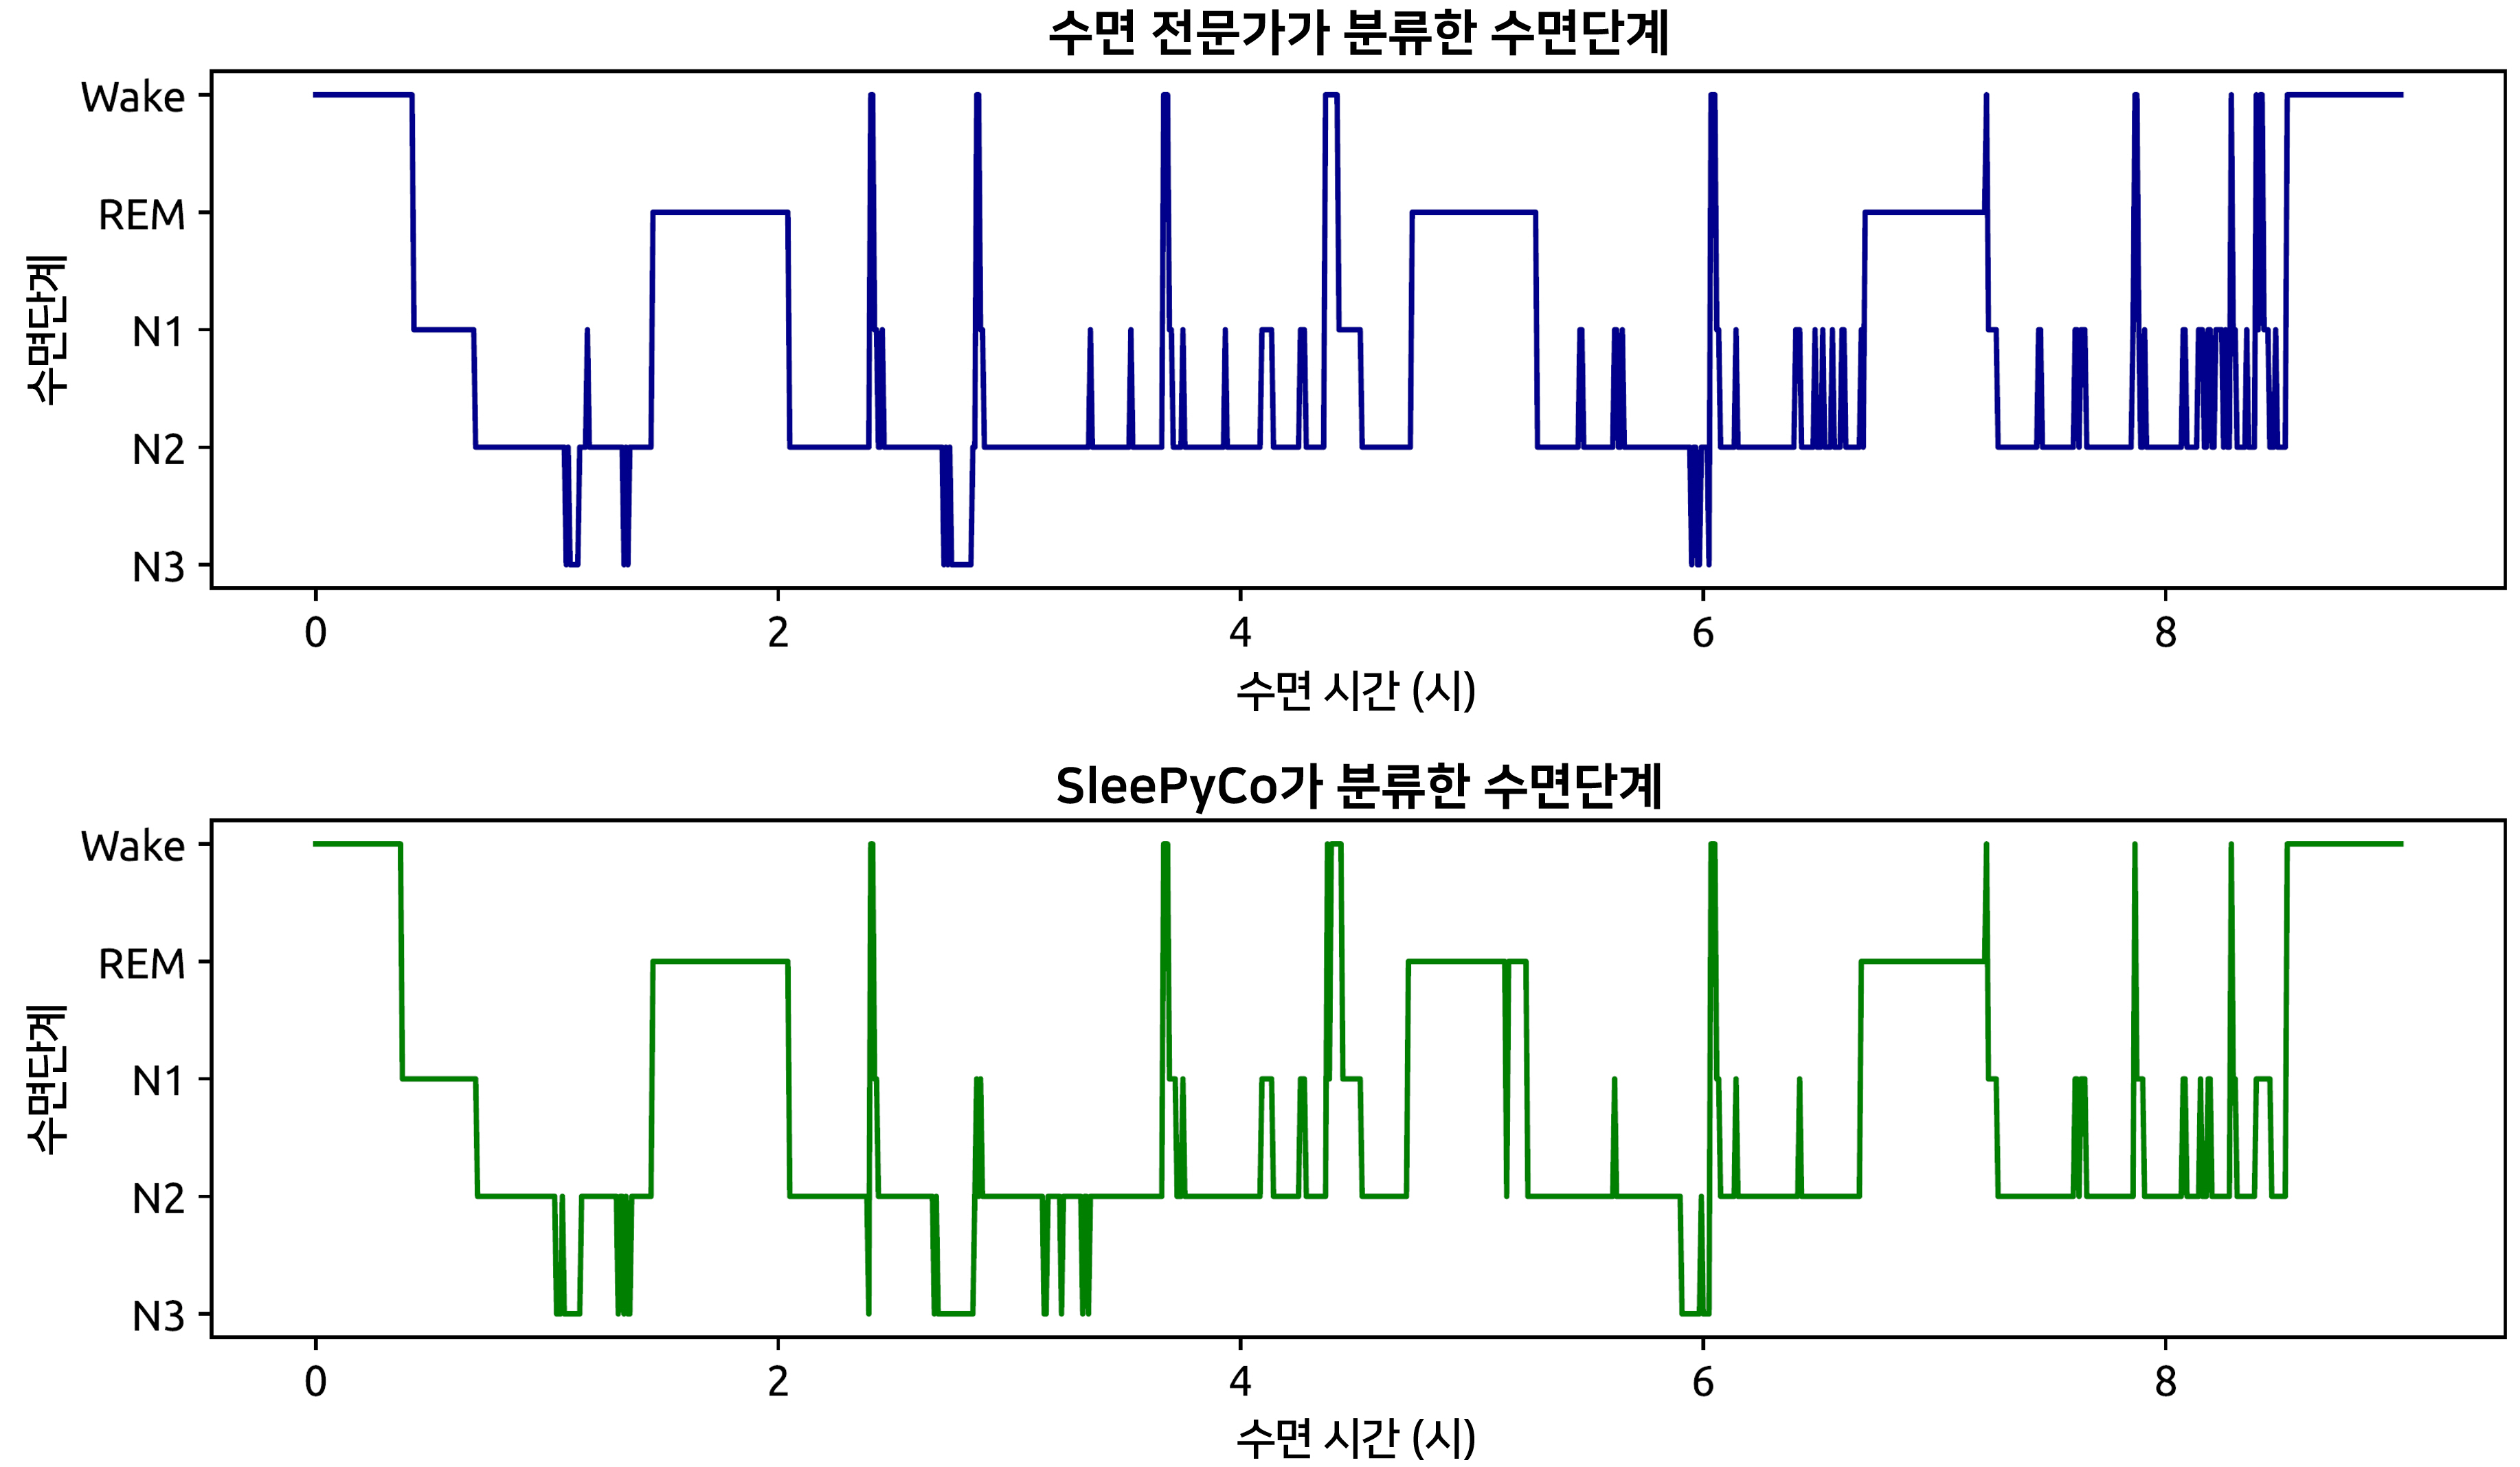 Professor Kyoobin Lee's research team reveals the 'good sleep' point revealed by AI: Achieving the world's highest level of sleep stage classification accuracy with AI technology 이미지